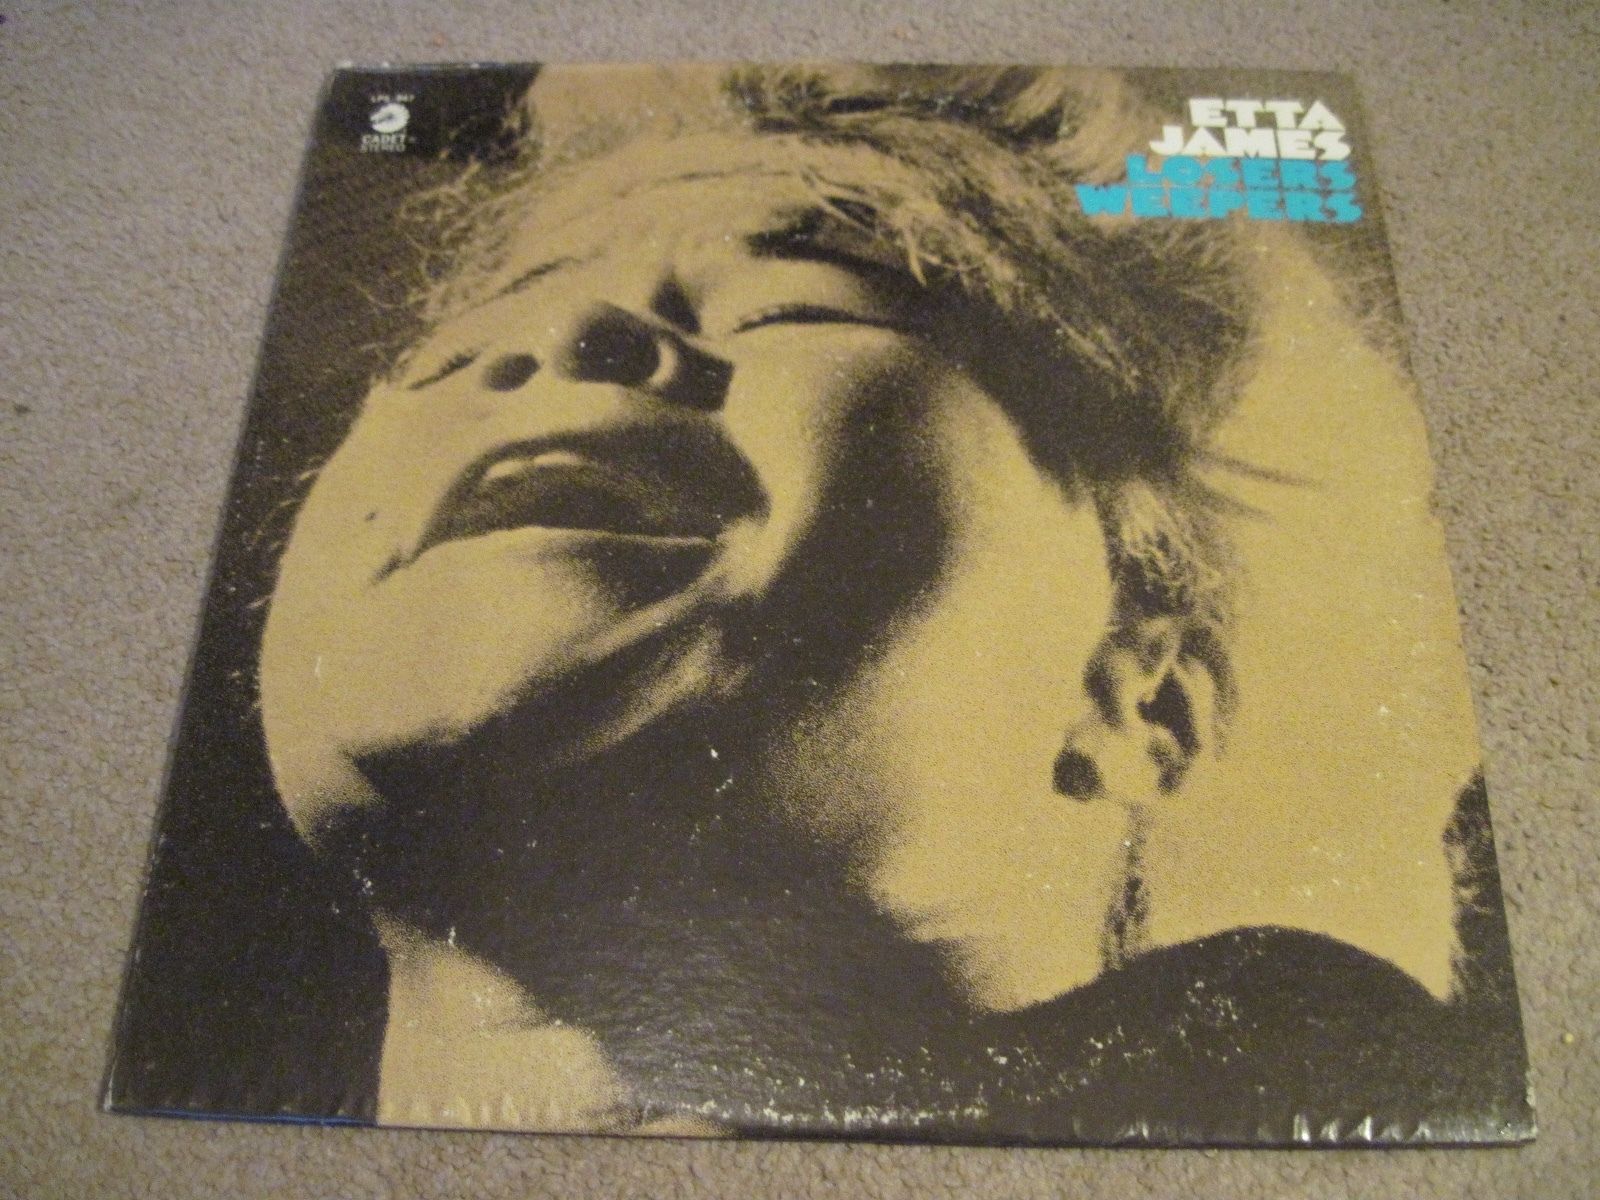 ETTA JAMES Losers Weepers  1970  CADET   USA   superb EX+